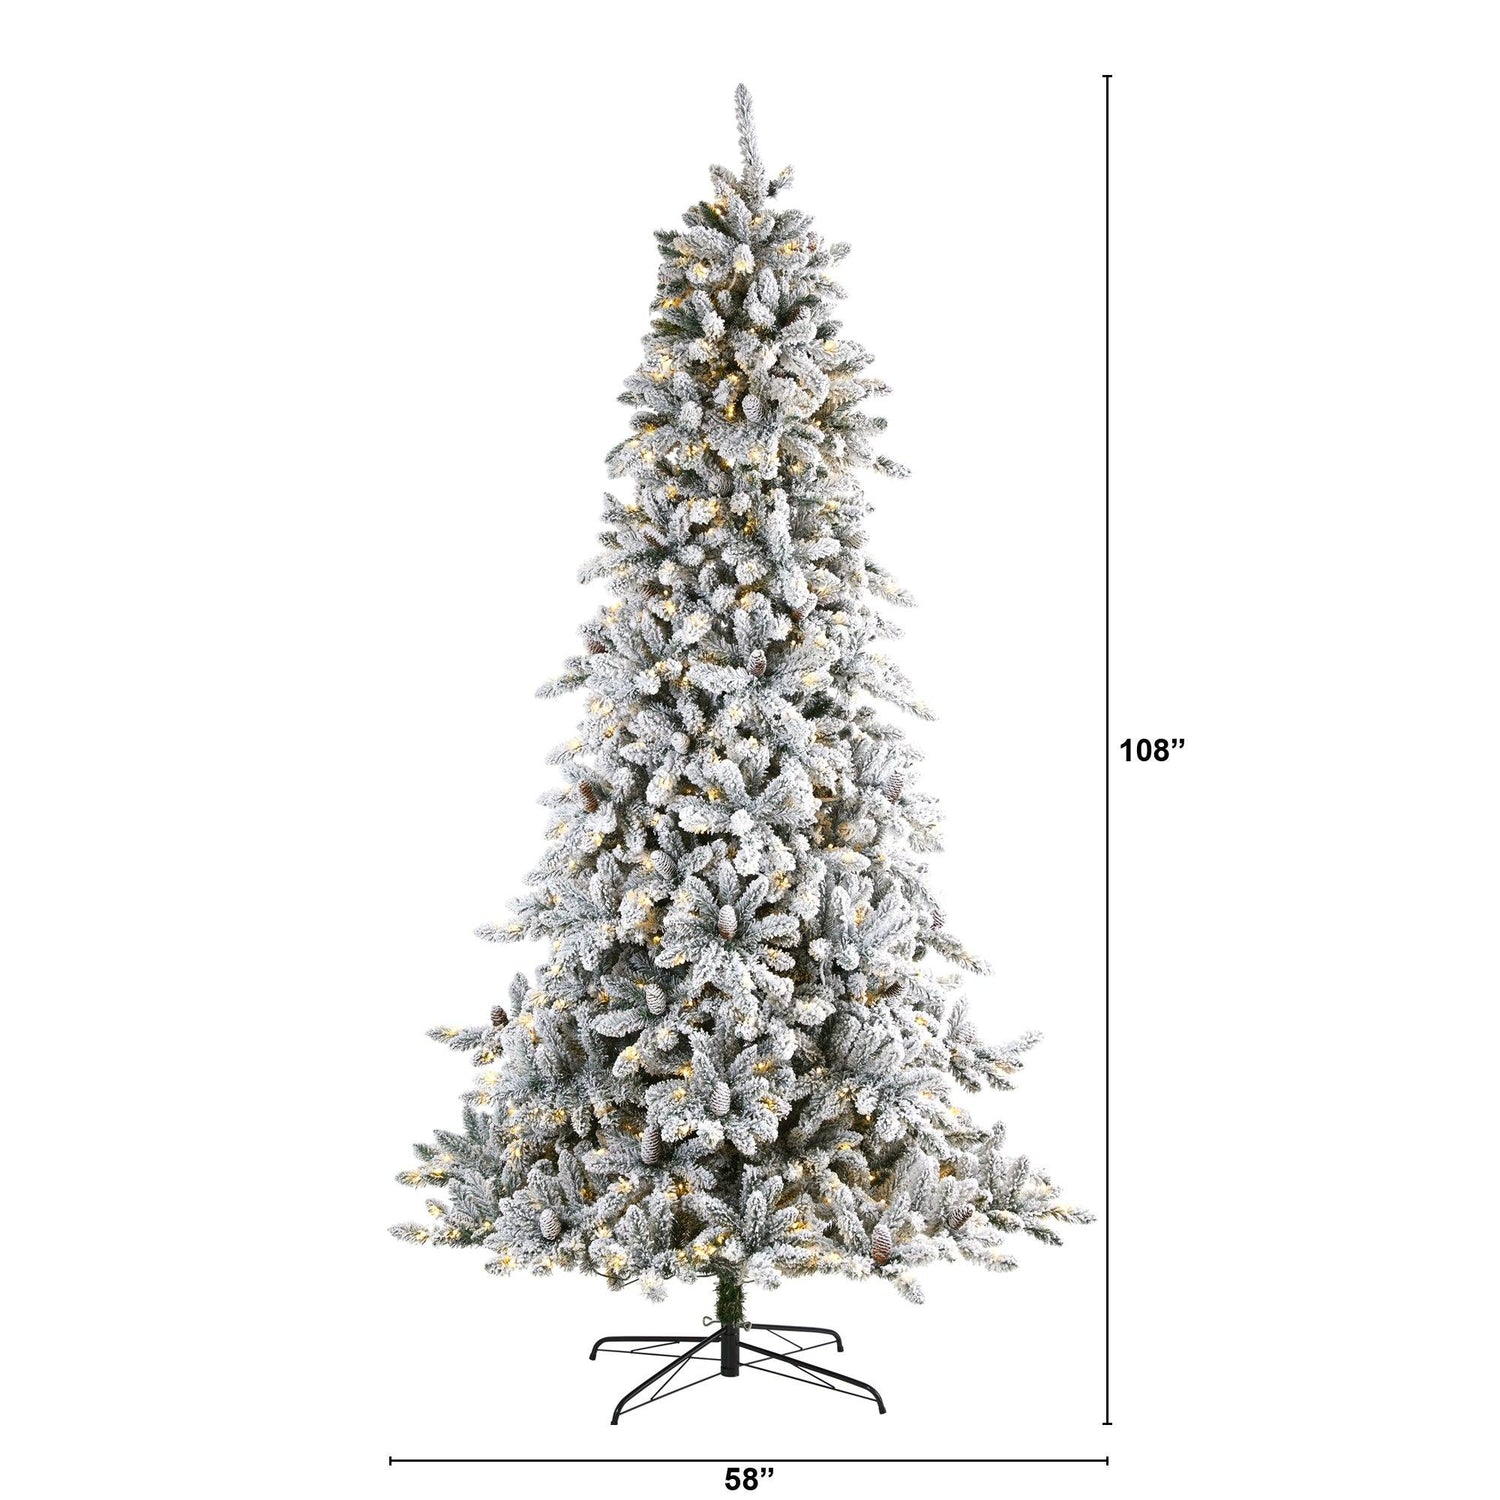 9’ Flocked Livingston Fir Artificial Christmas Tree with Pine Cones and 650 Clear Warm LED Lights